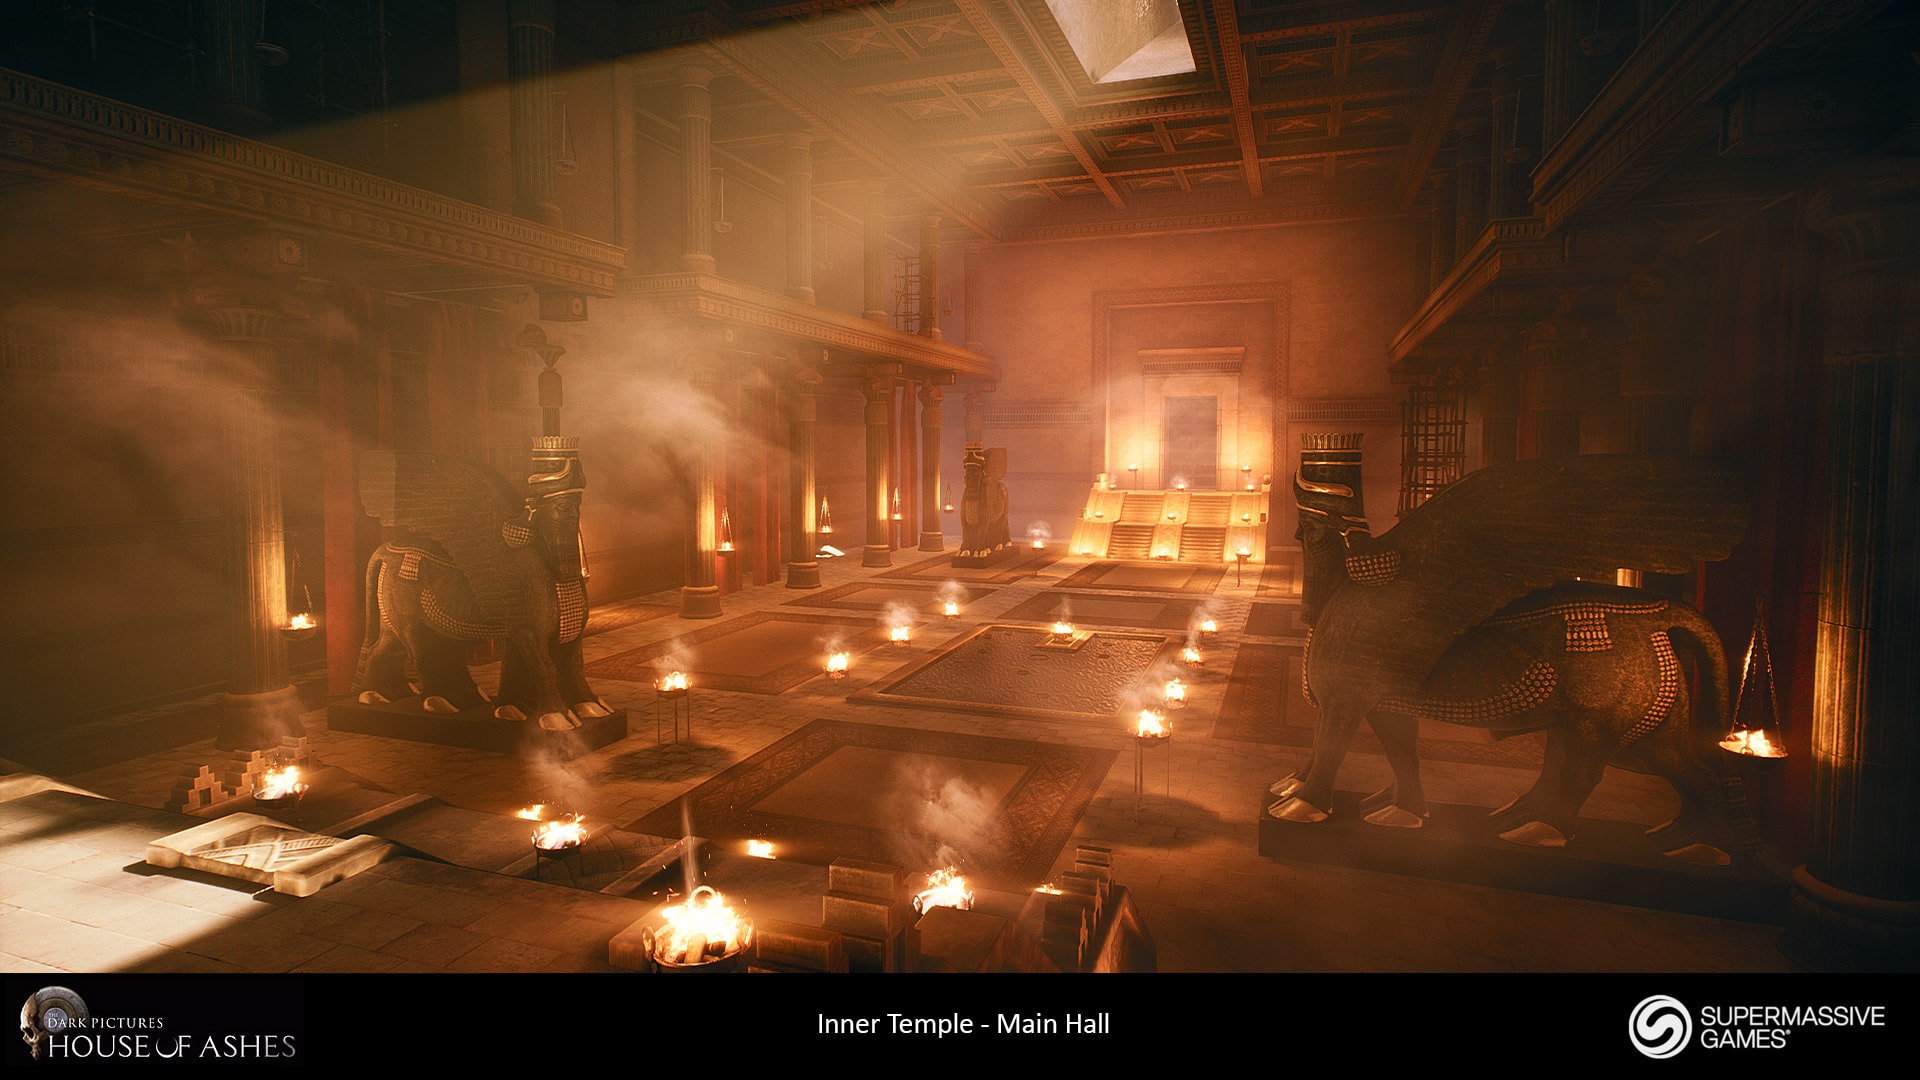 House of Ashes UE4 Renders